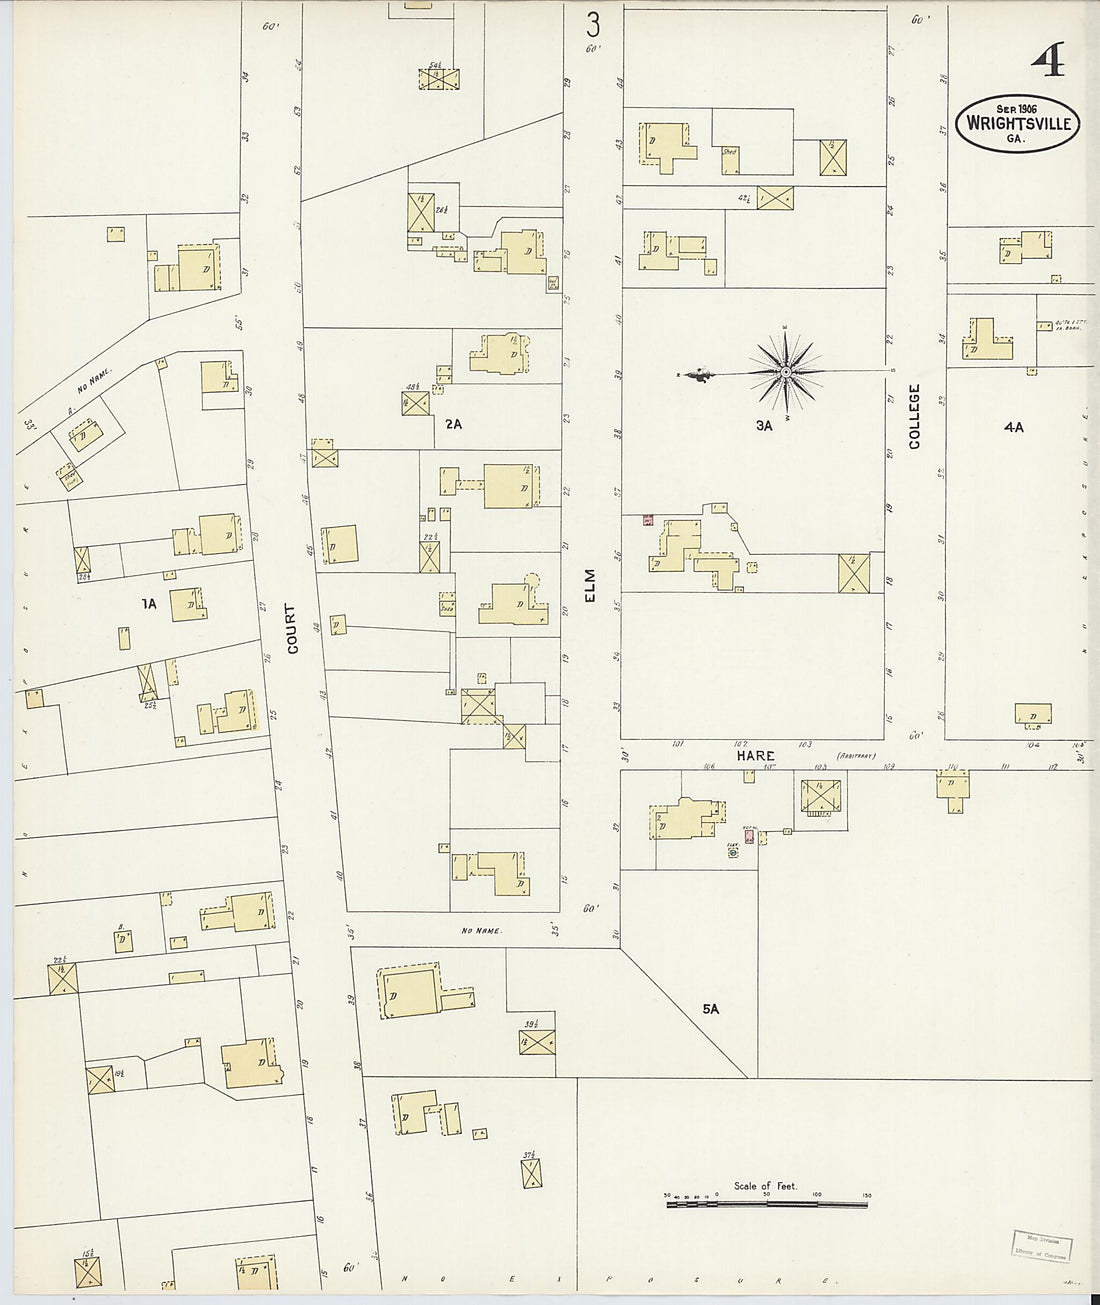 This old map of Wrightsville, Johnson County, Georgia was created by Sanborn Map Company in 1906